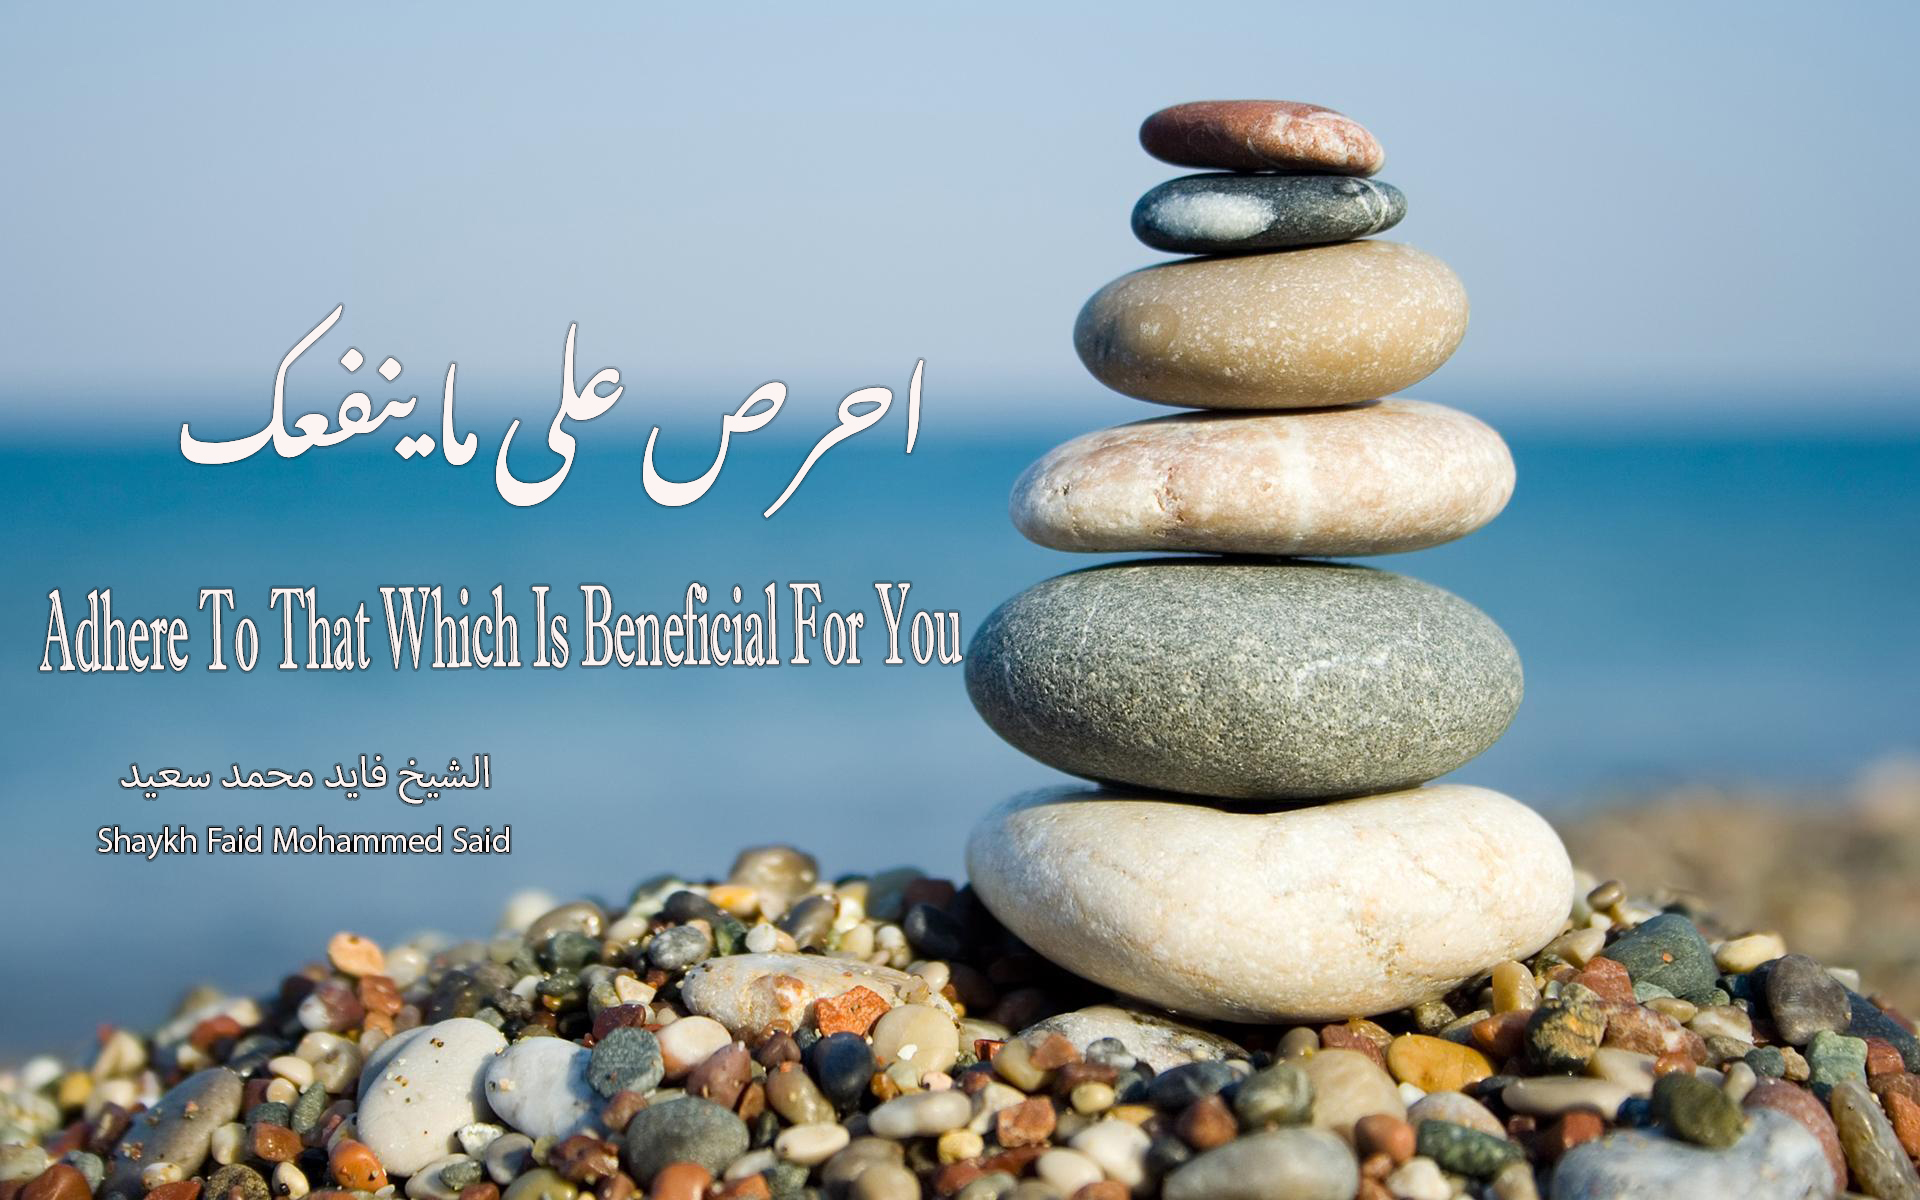 Adhere To That Which Is Beneficial For You